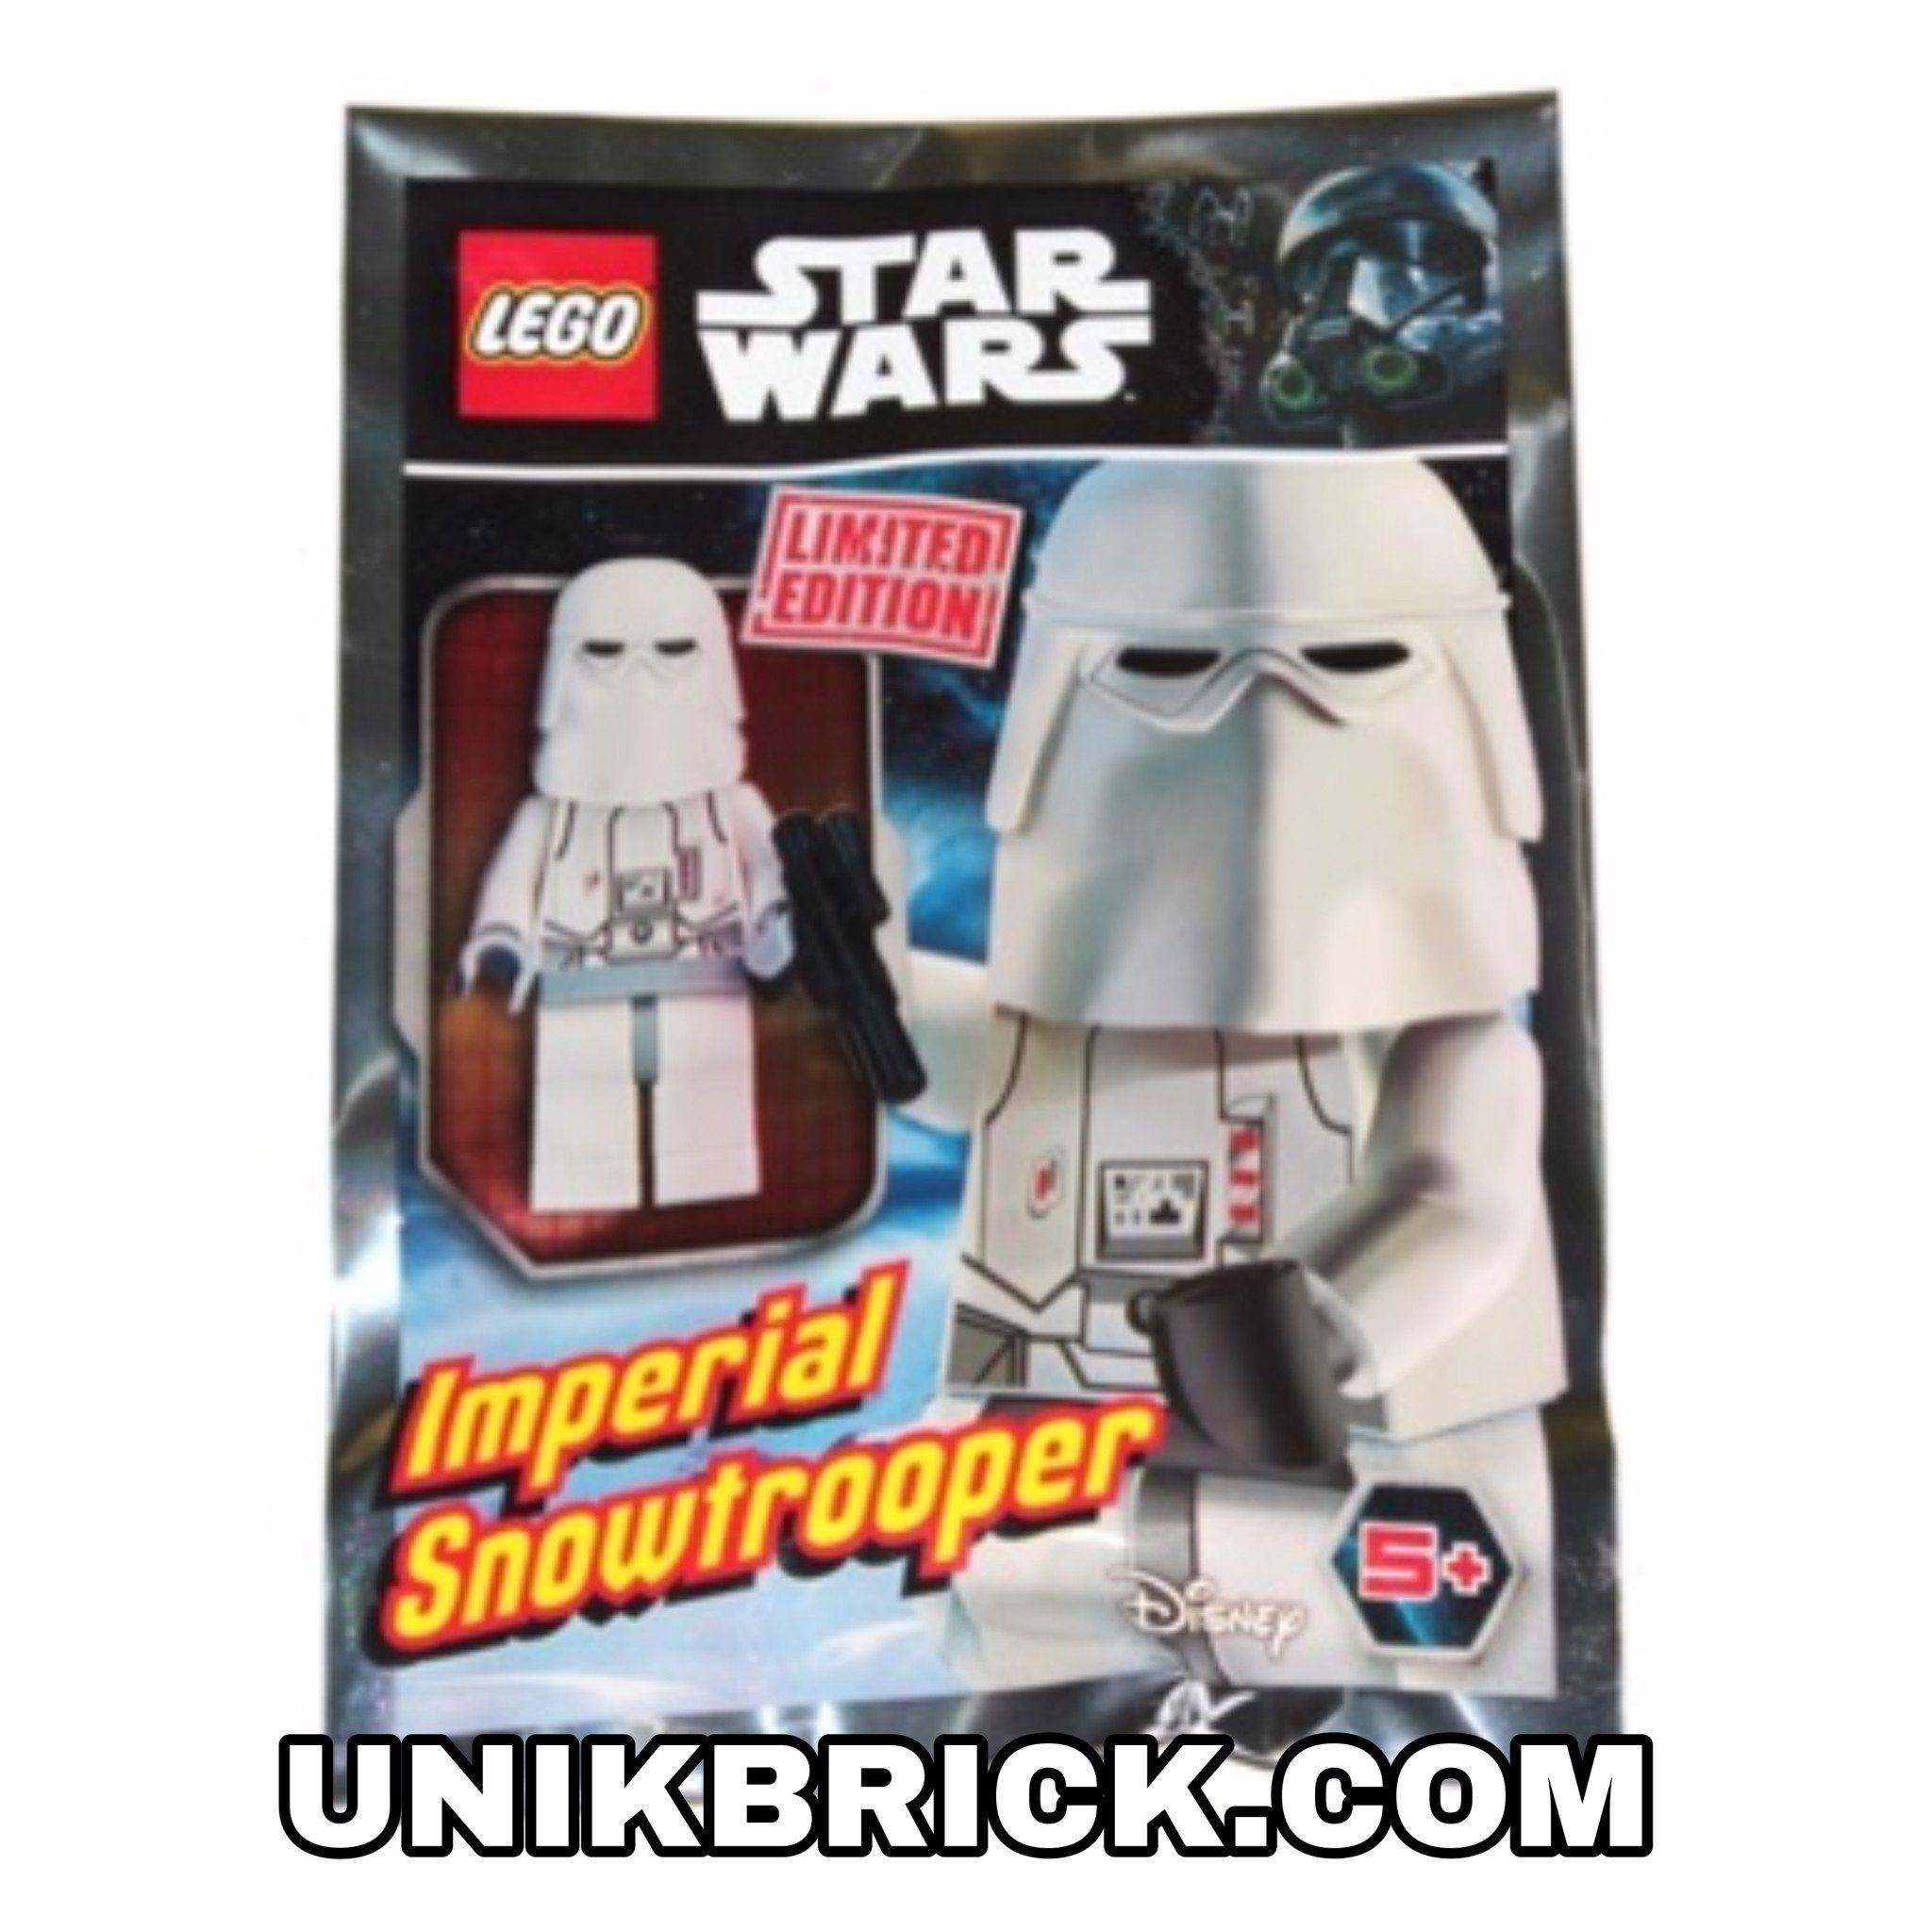 LEGO Star Wars 911726 Imperial Snowtrooper Foil Pack Polybag